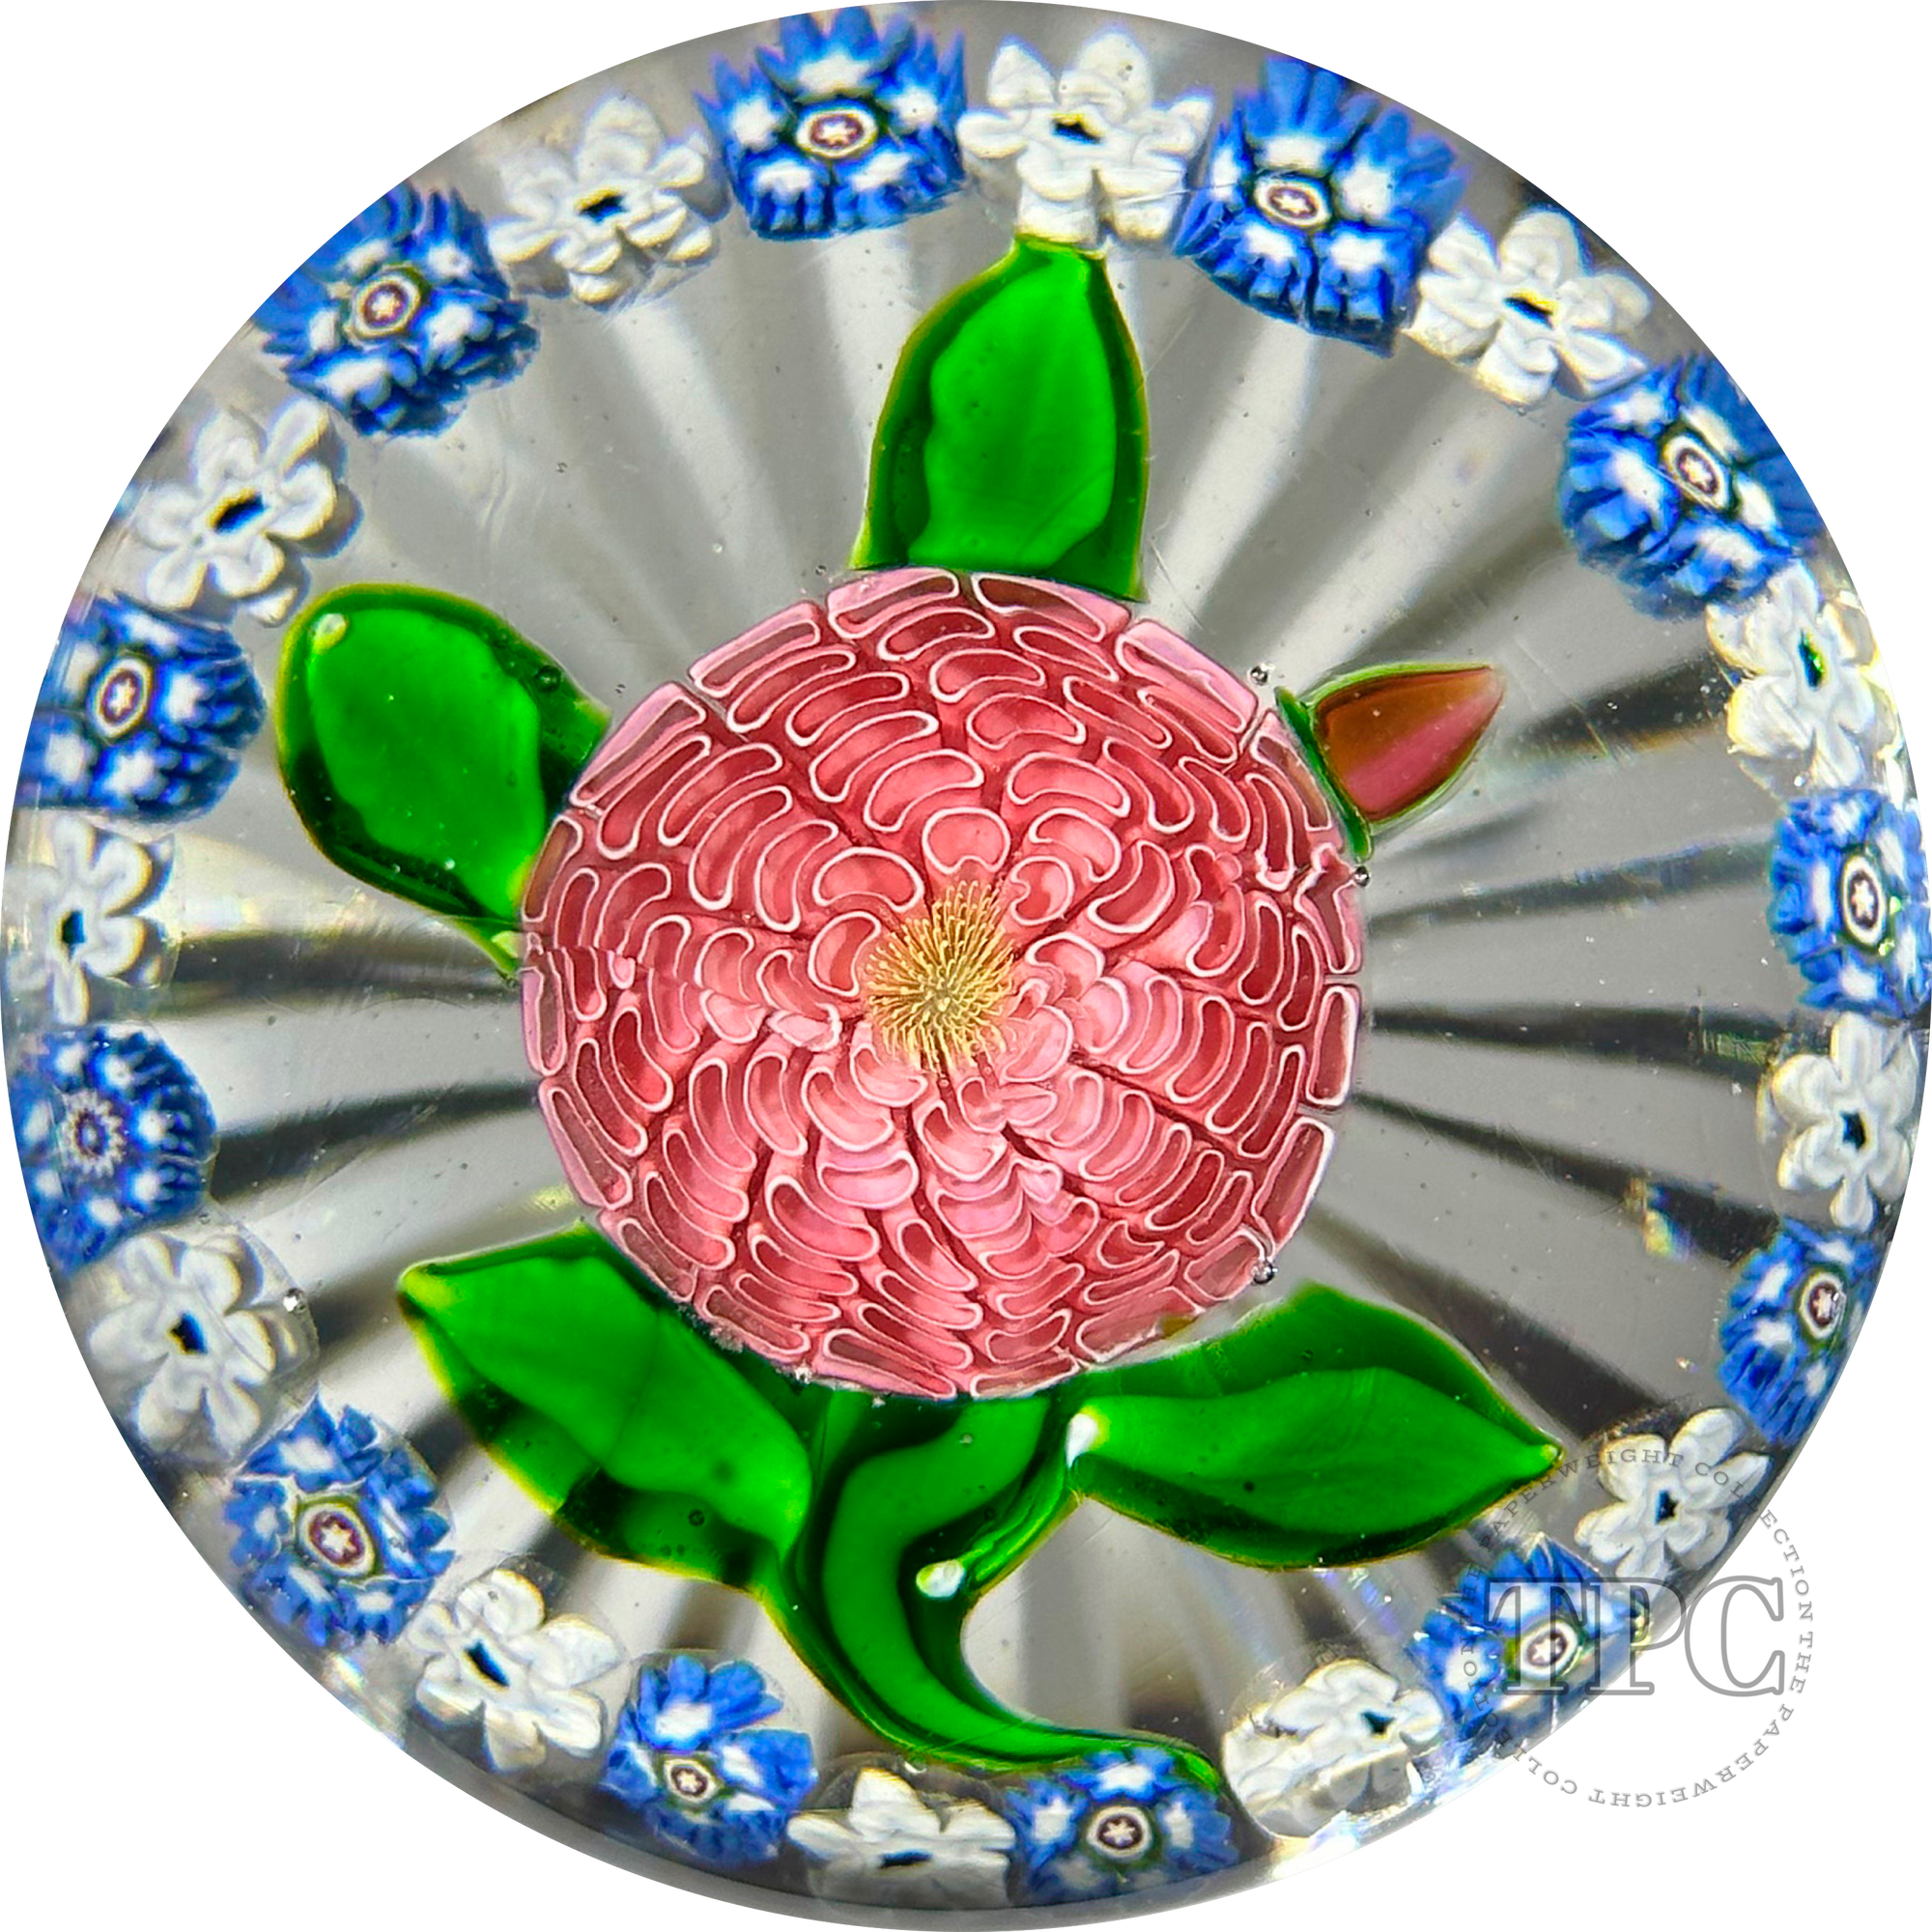 Antique Saint-Louis Glass Art Paperweight Lampwork Pink Pompon Blossom with Blue and White Millefiori Garland